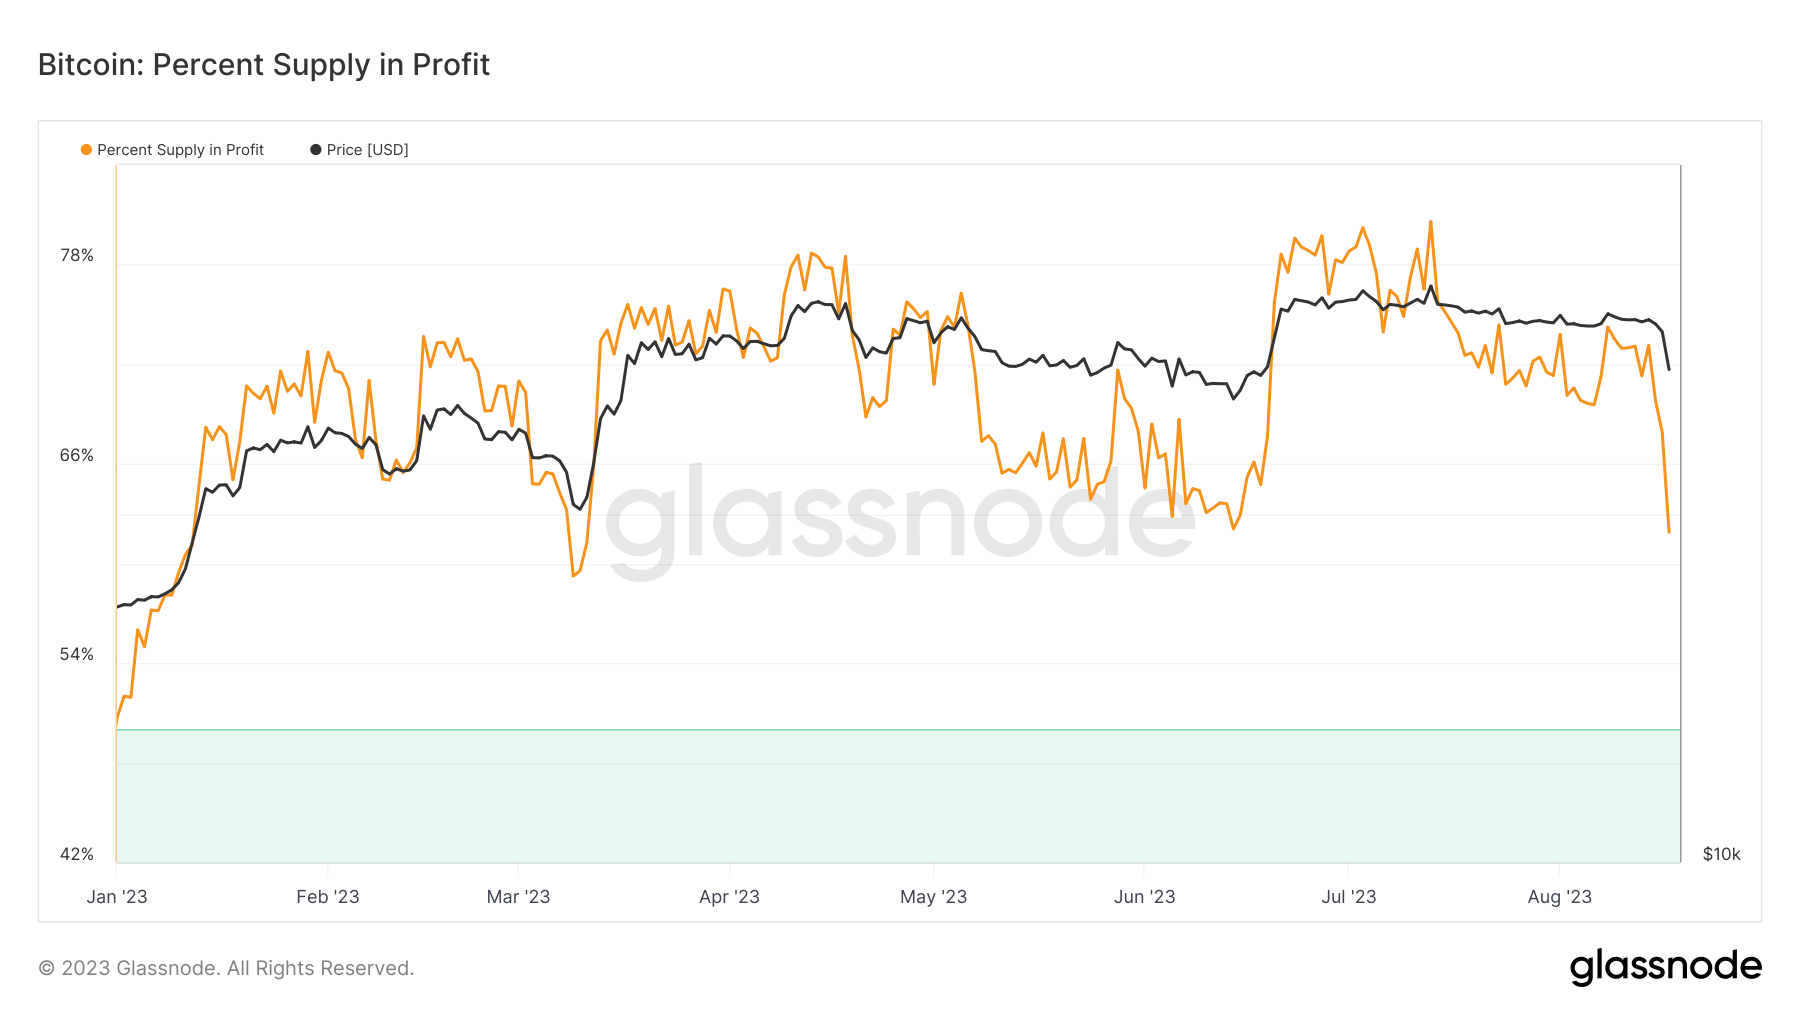 realized loss percent supply in profit bitcoin